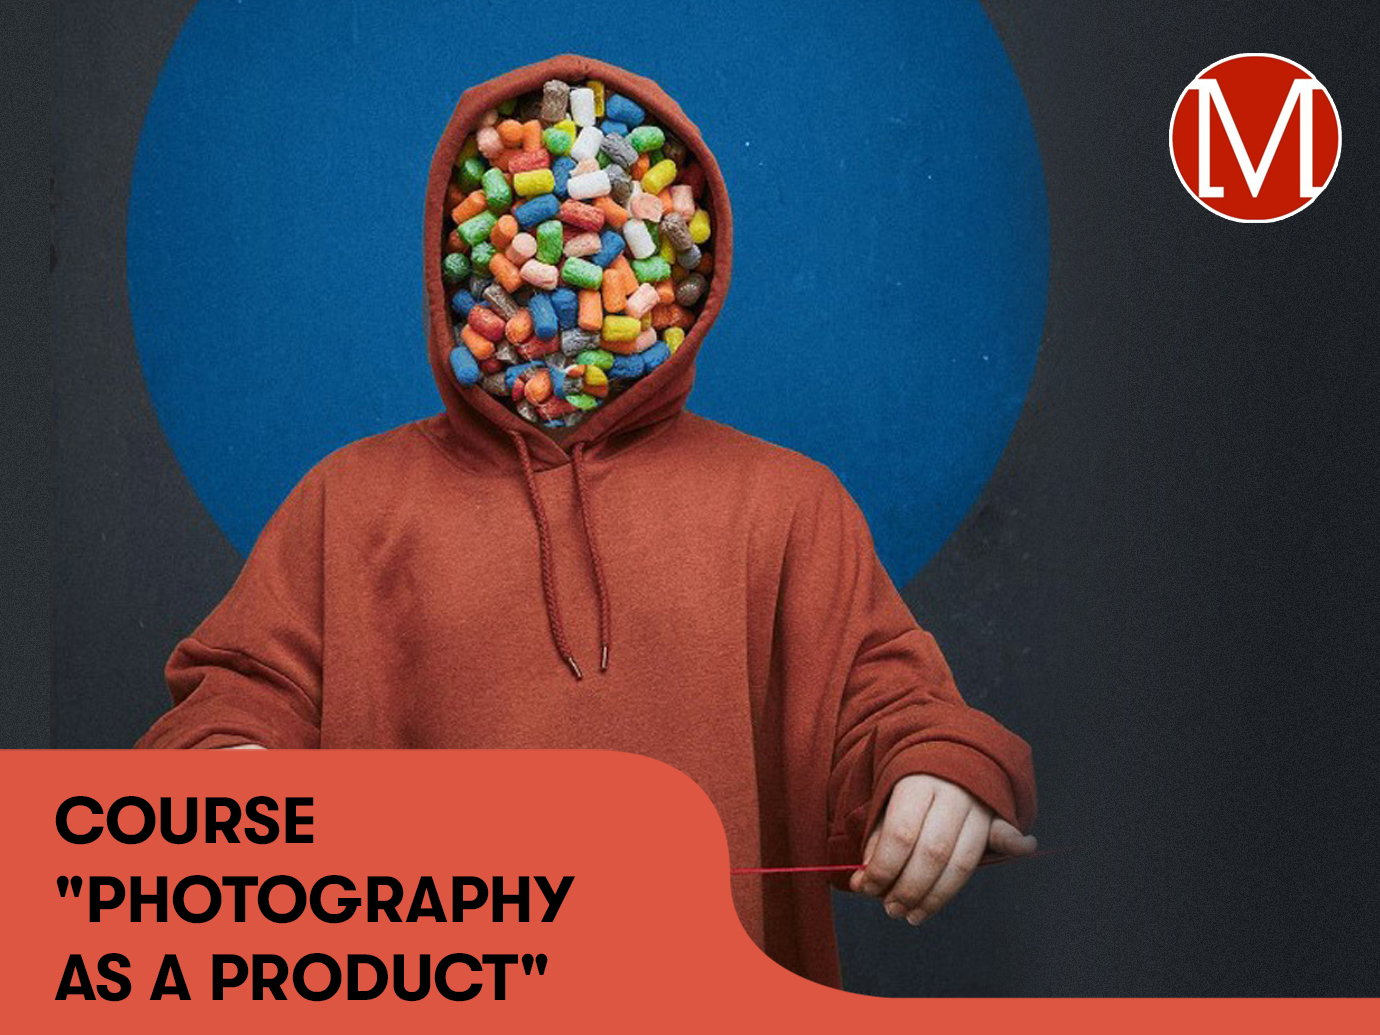 COURSE “PHOTOGRAPHY AS A PRODUCT“